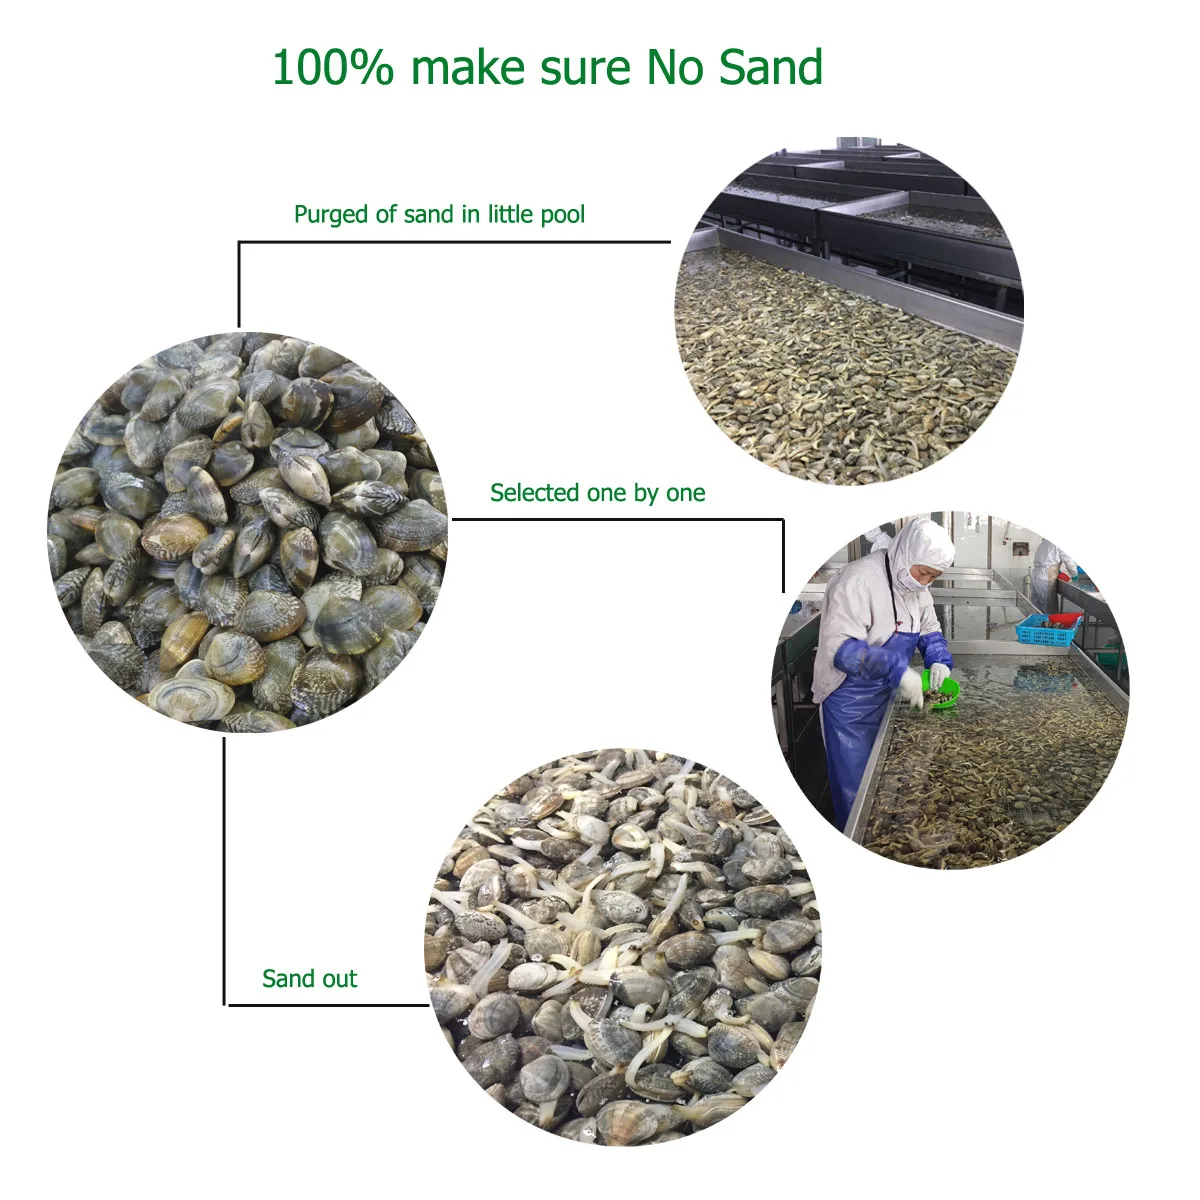 sand out.jpg